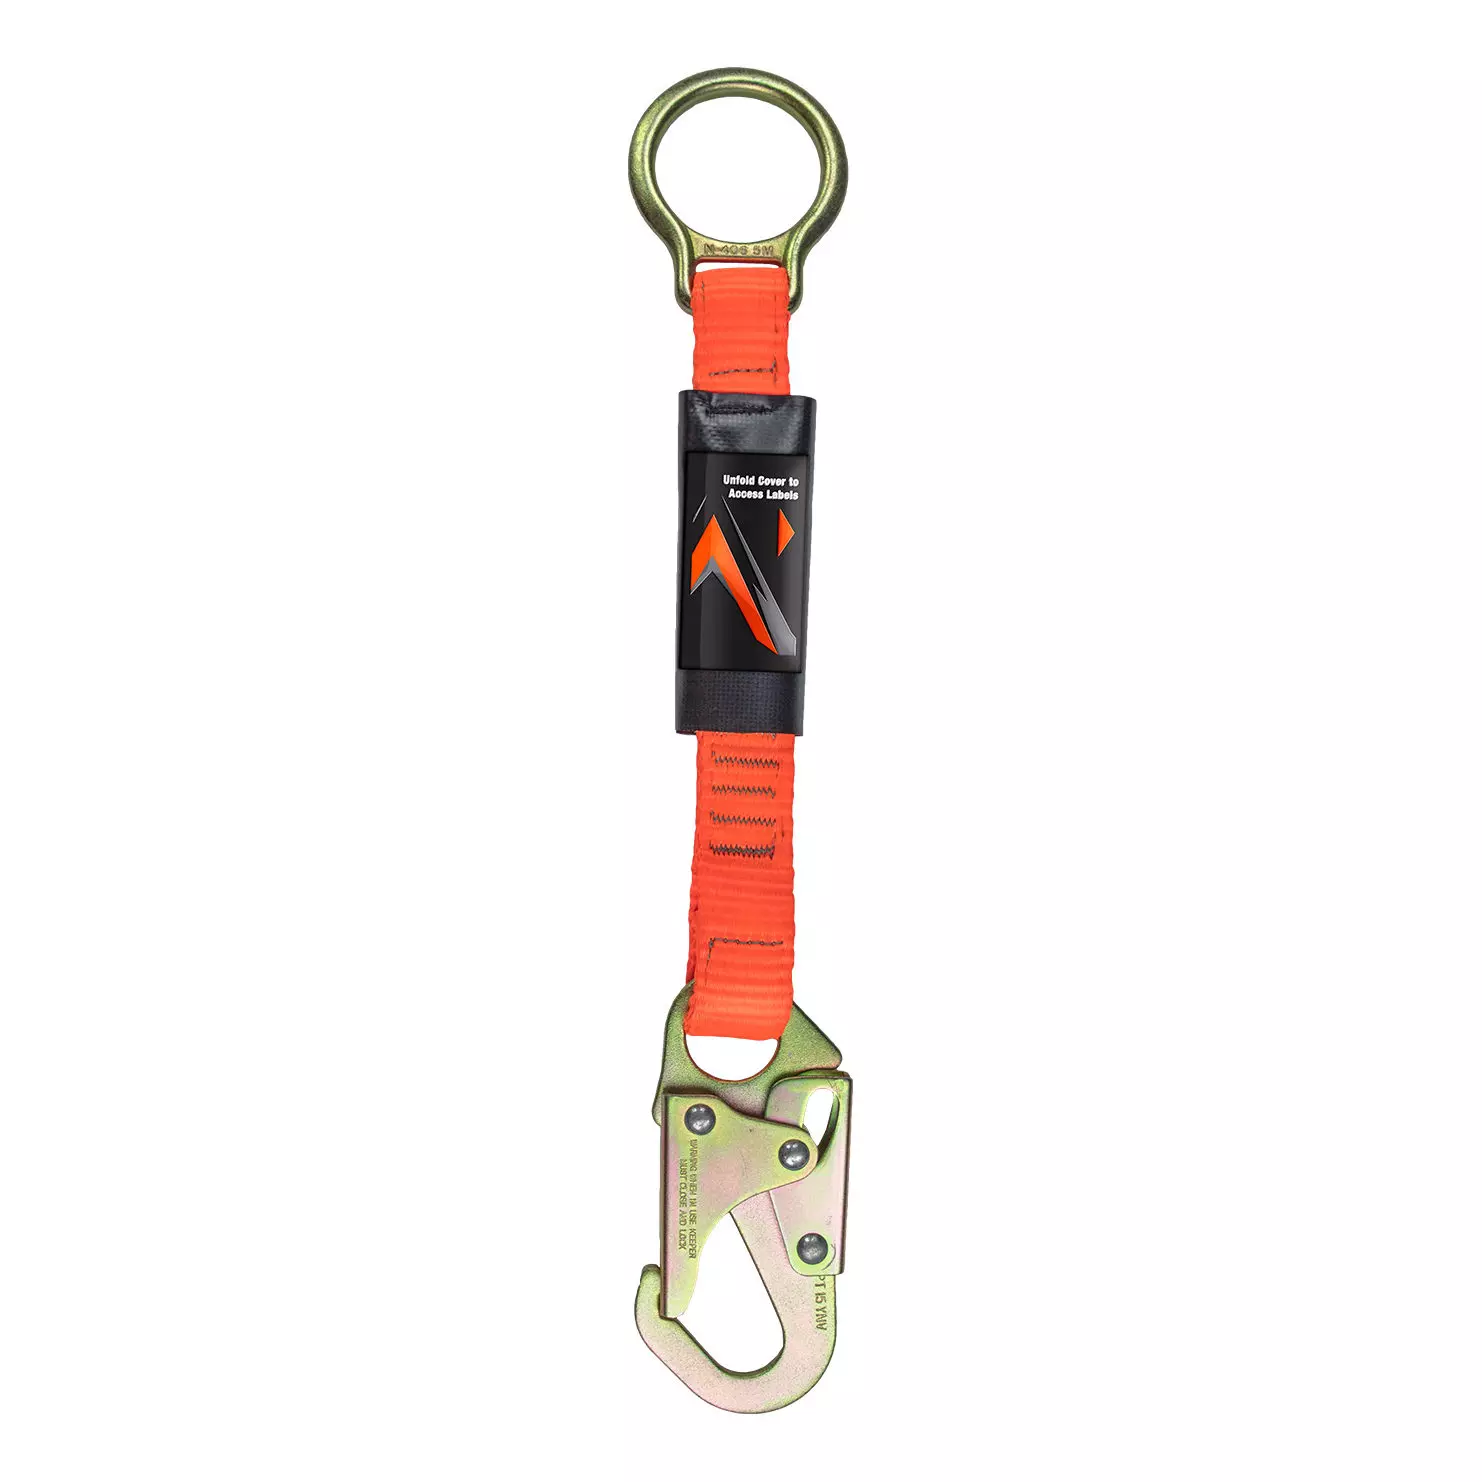 D-Ring Extension Protecta 18 c/w D-Ring OE Snap Hook OE - Northern Strands